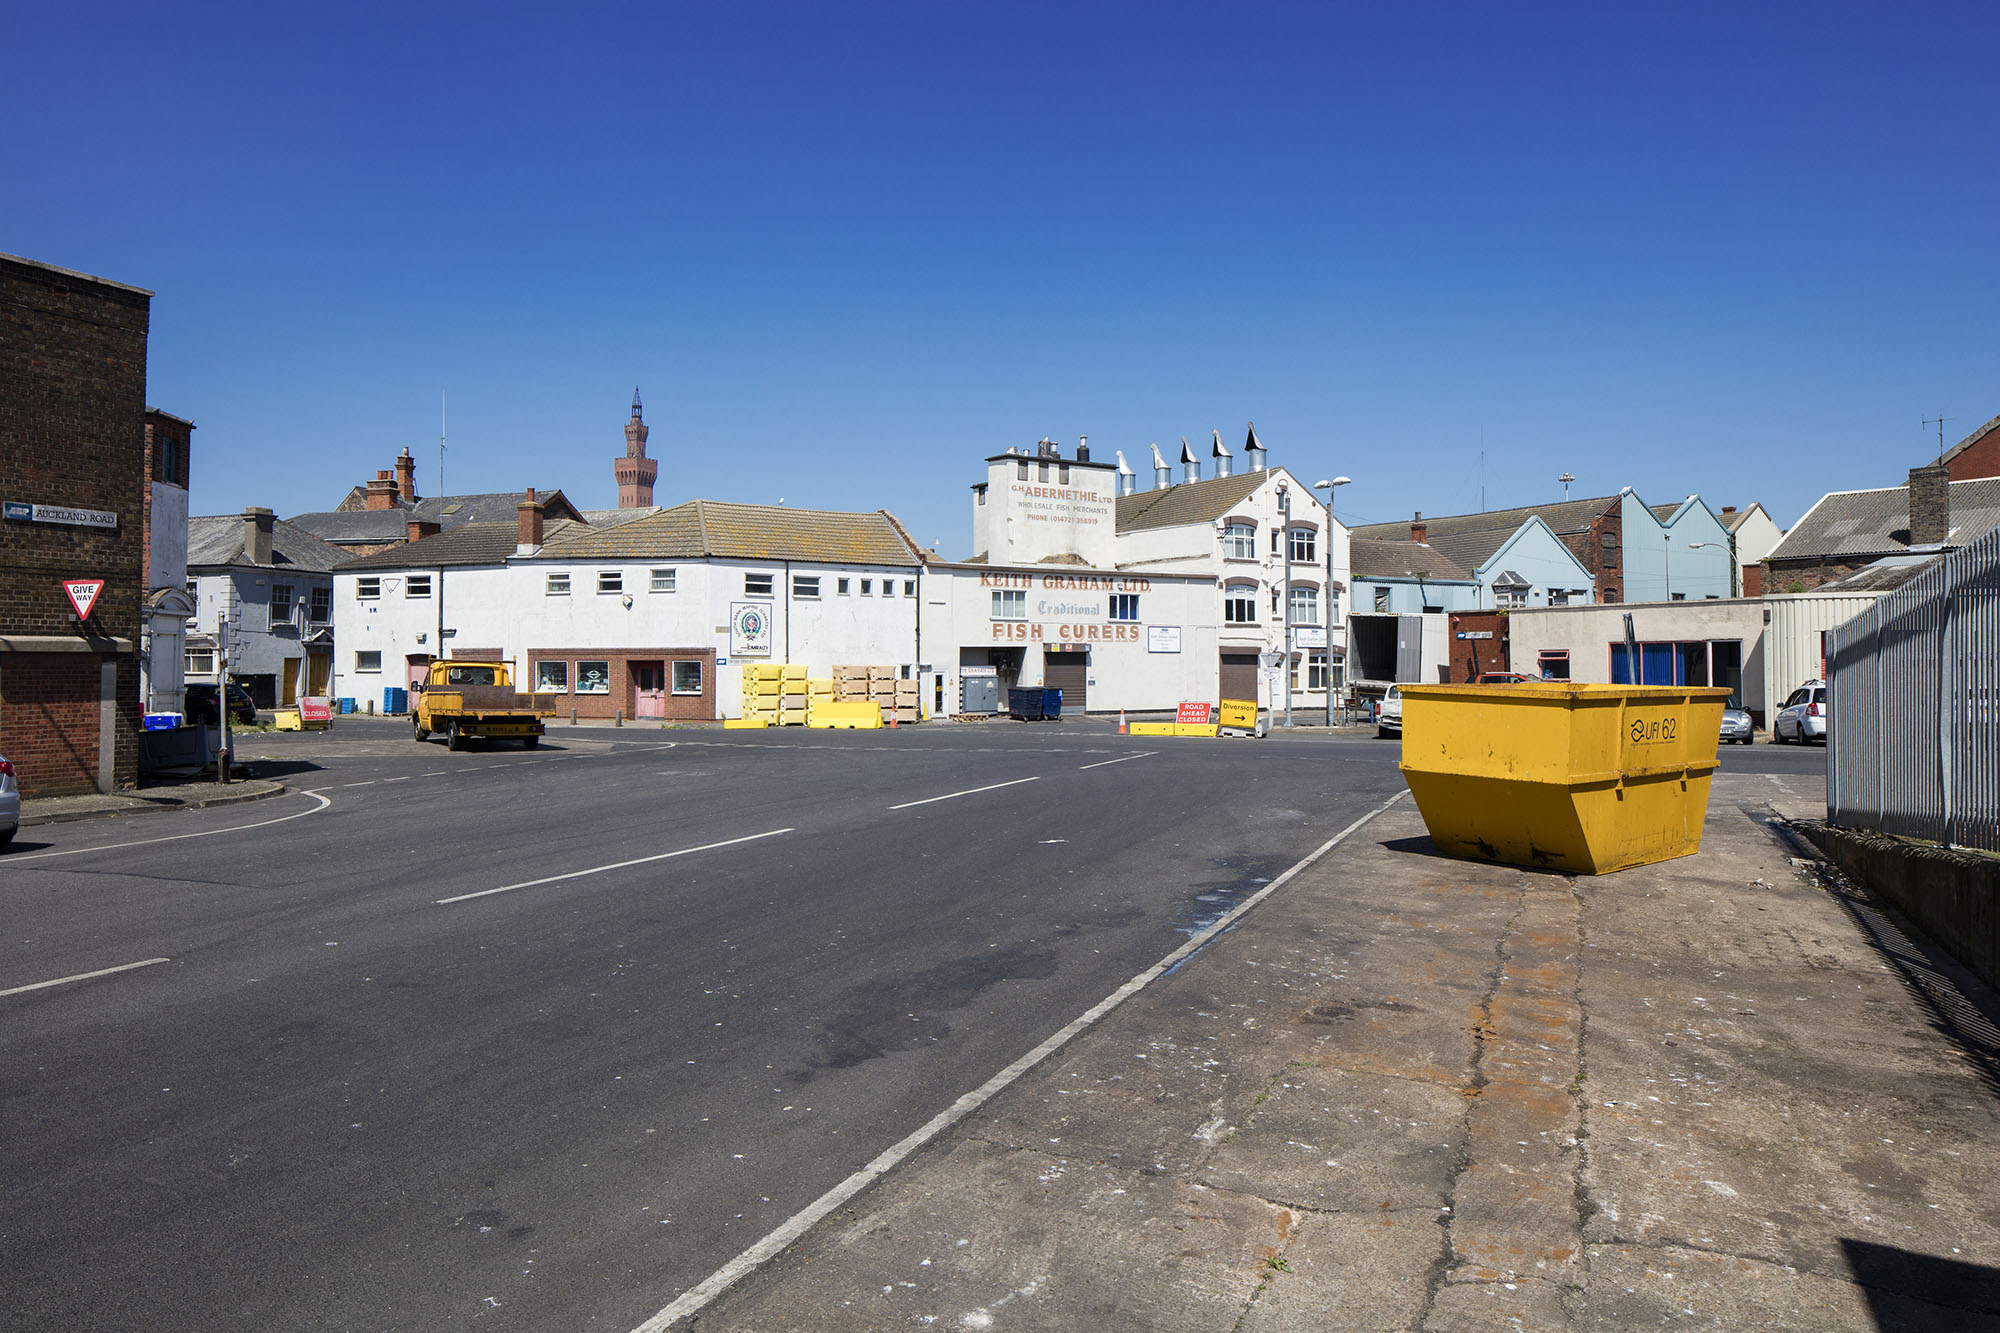 Photo shows a yellow skip on a pavememnt and historic buildings in the background revealing Grimsby's fishing heritage